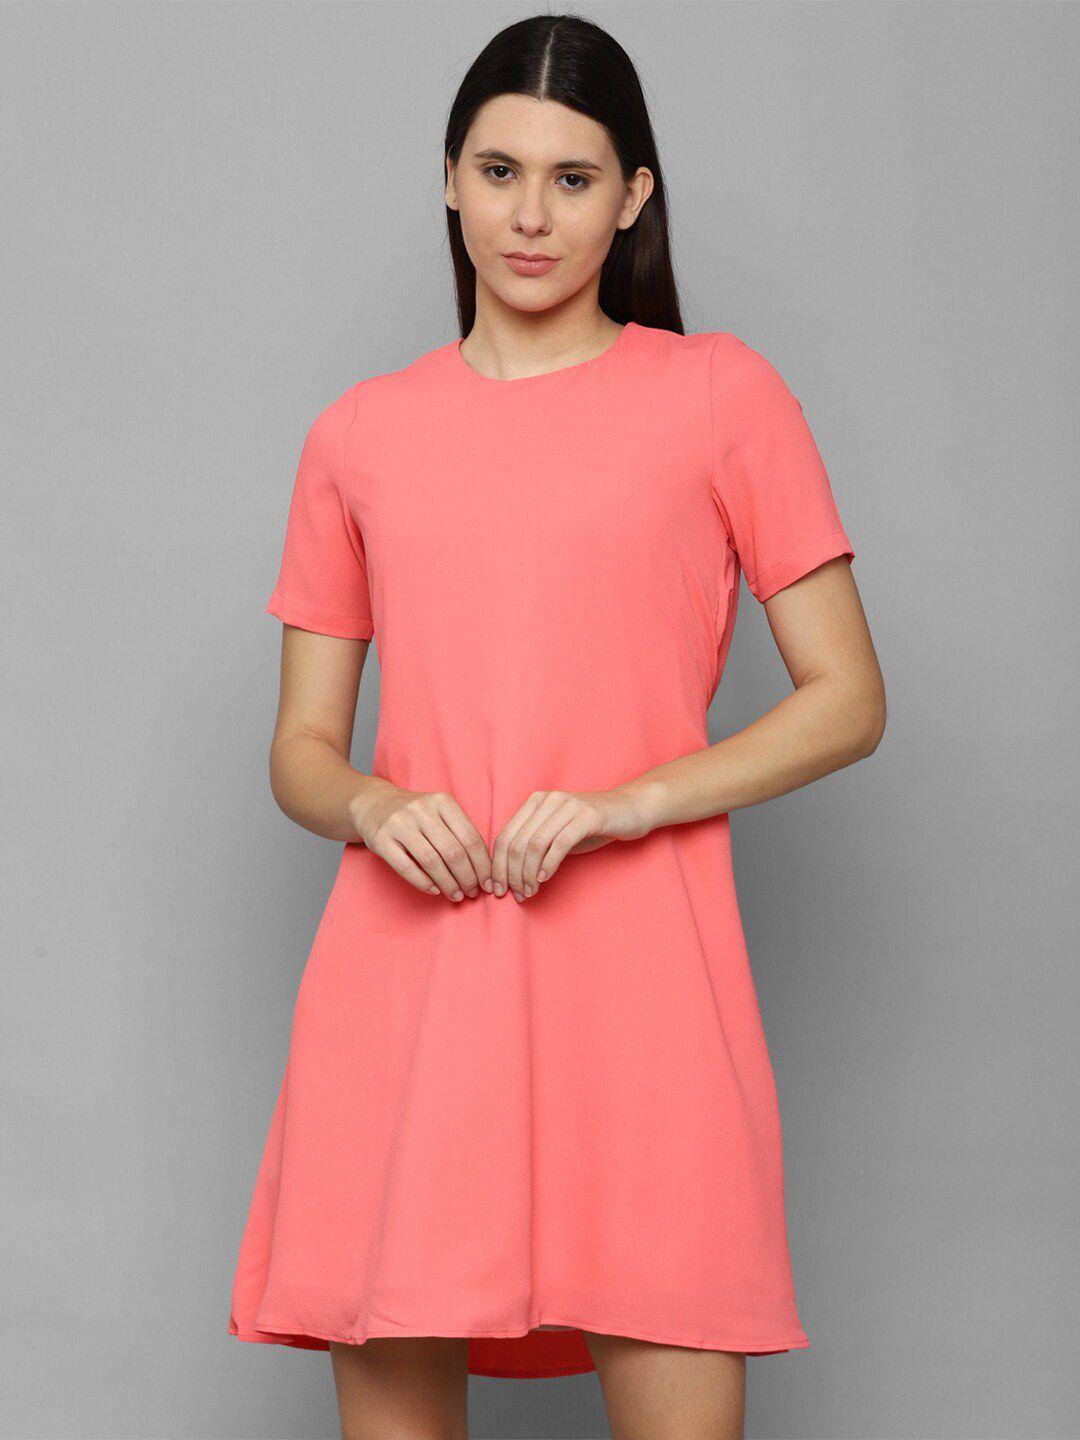 allen solly woman peach-coloured solid a-line dress